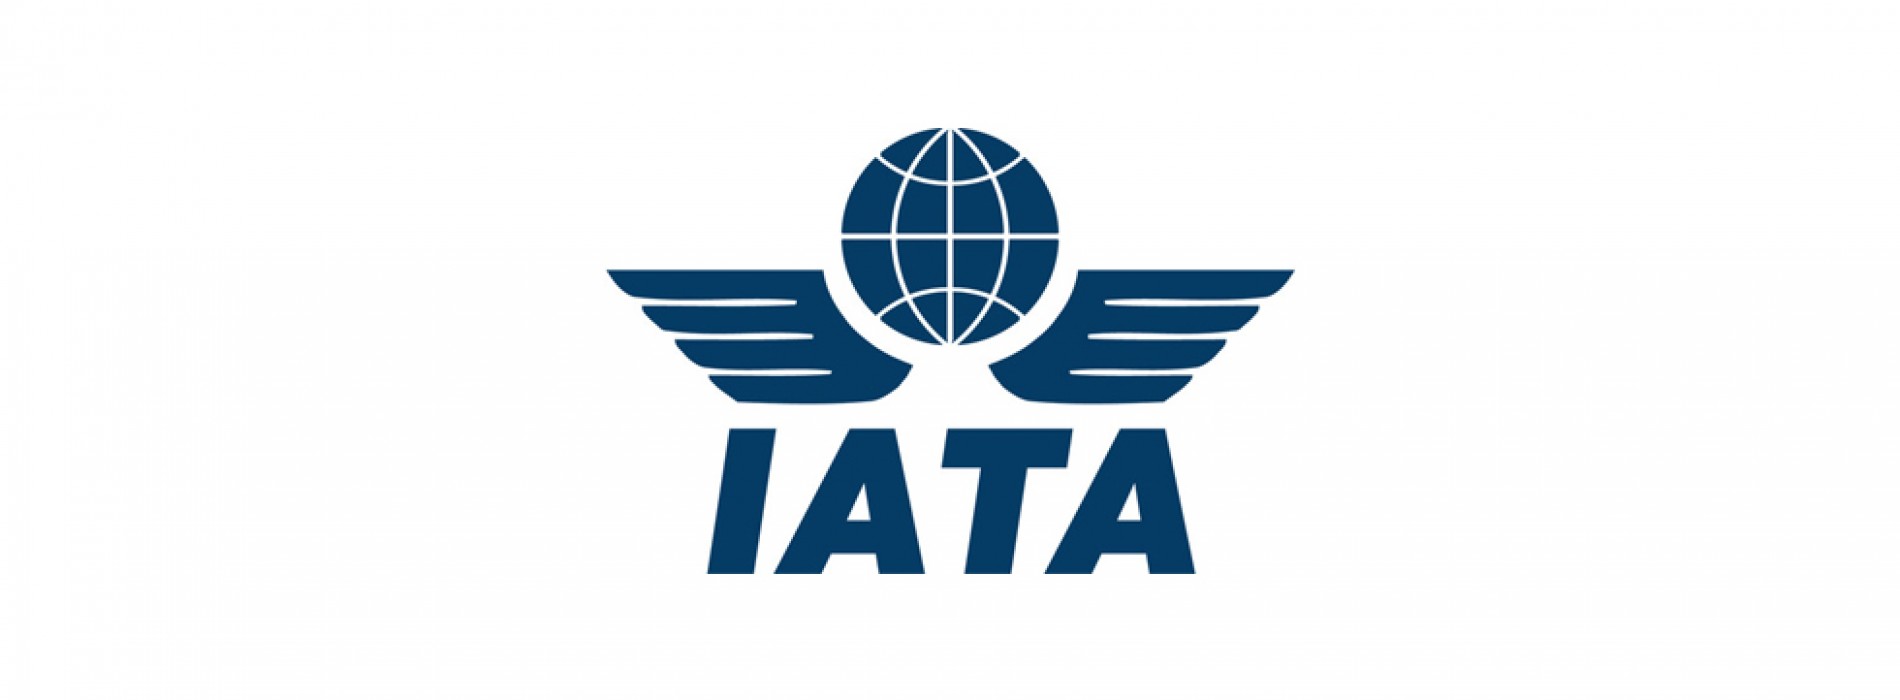 India to have 478 million air passengers in 2036 says IATA